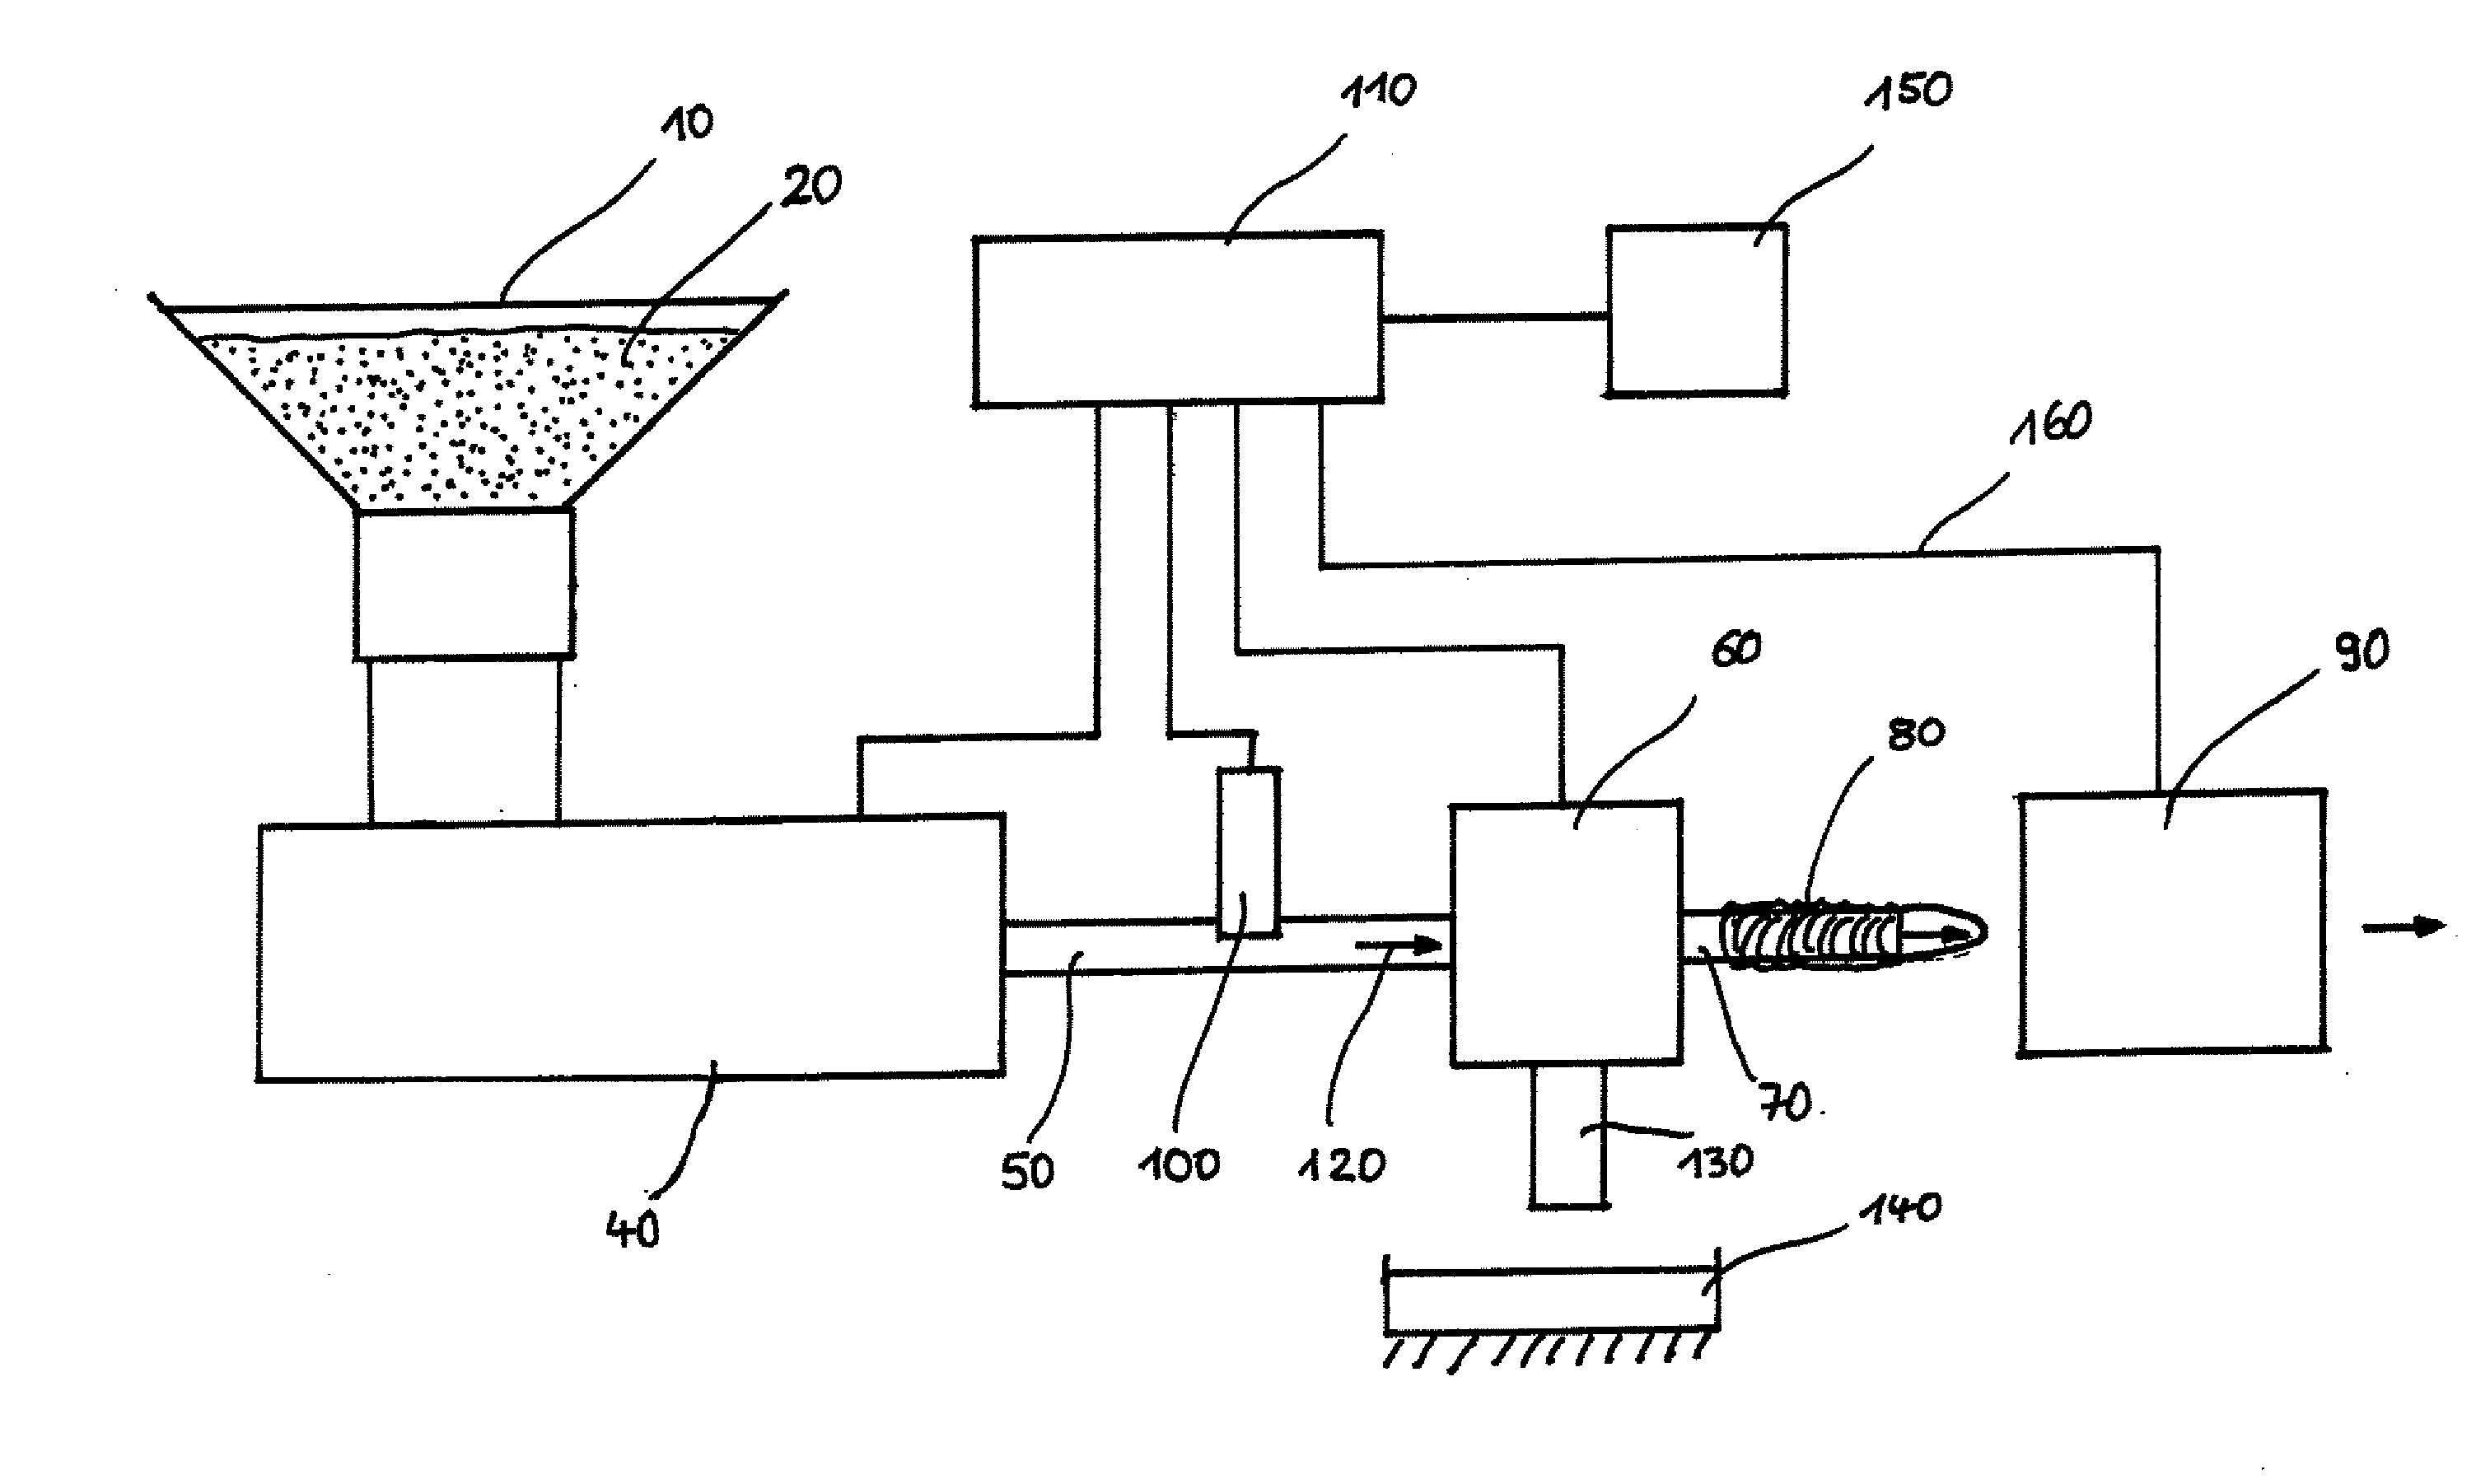 Packaging equipment and process for controlling of the packaging equipment